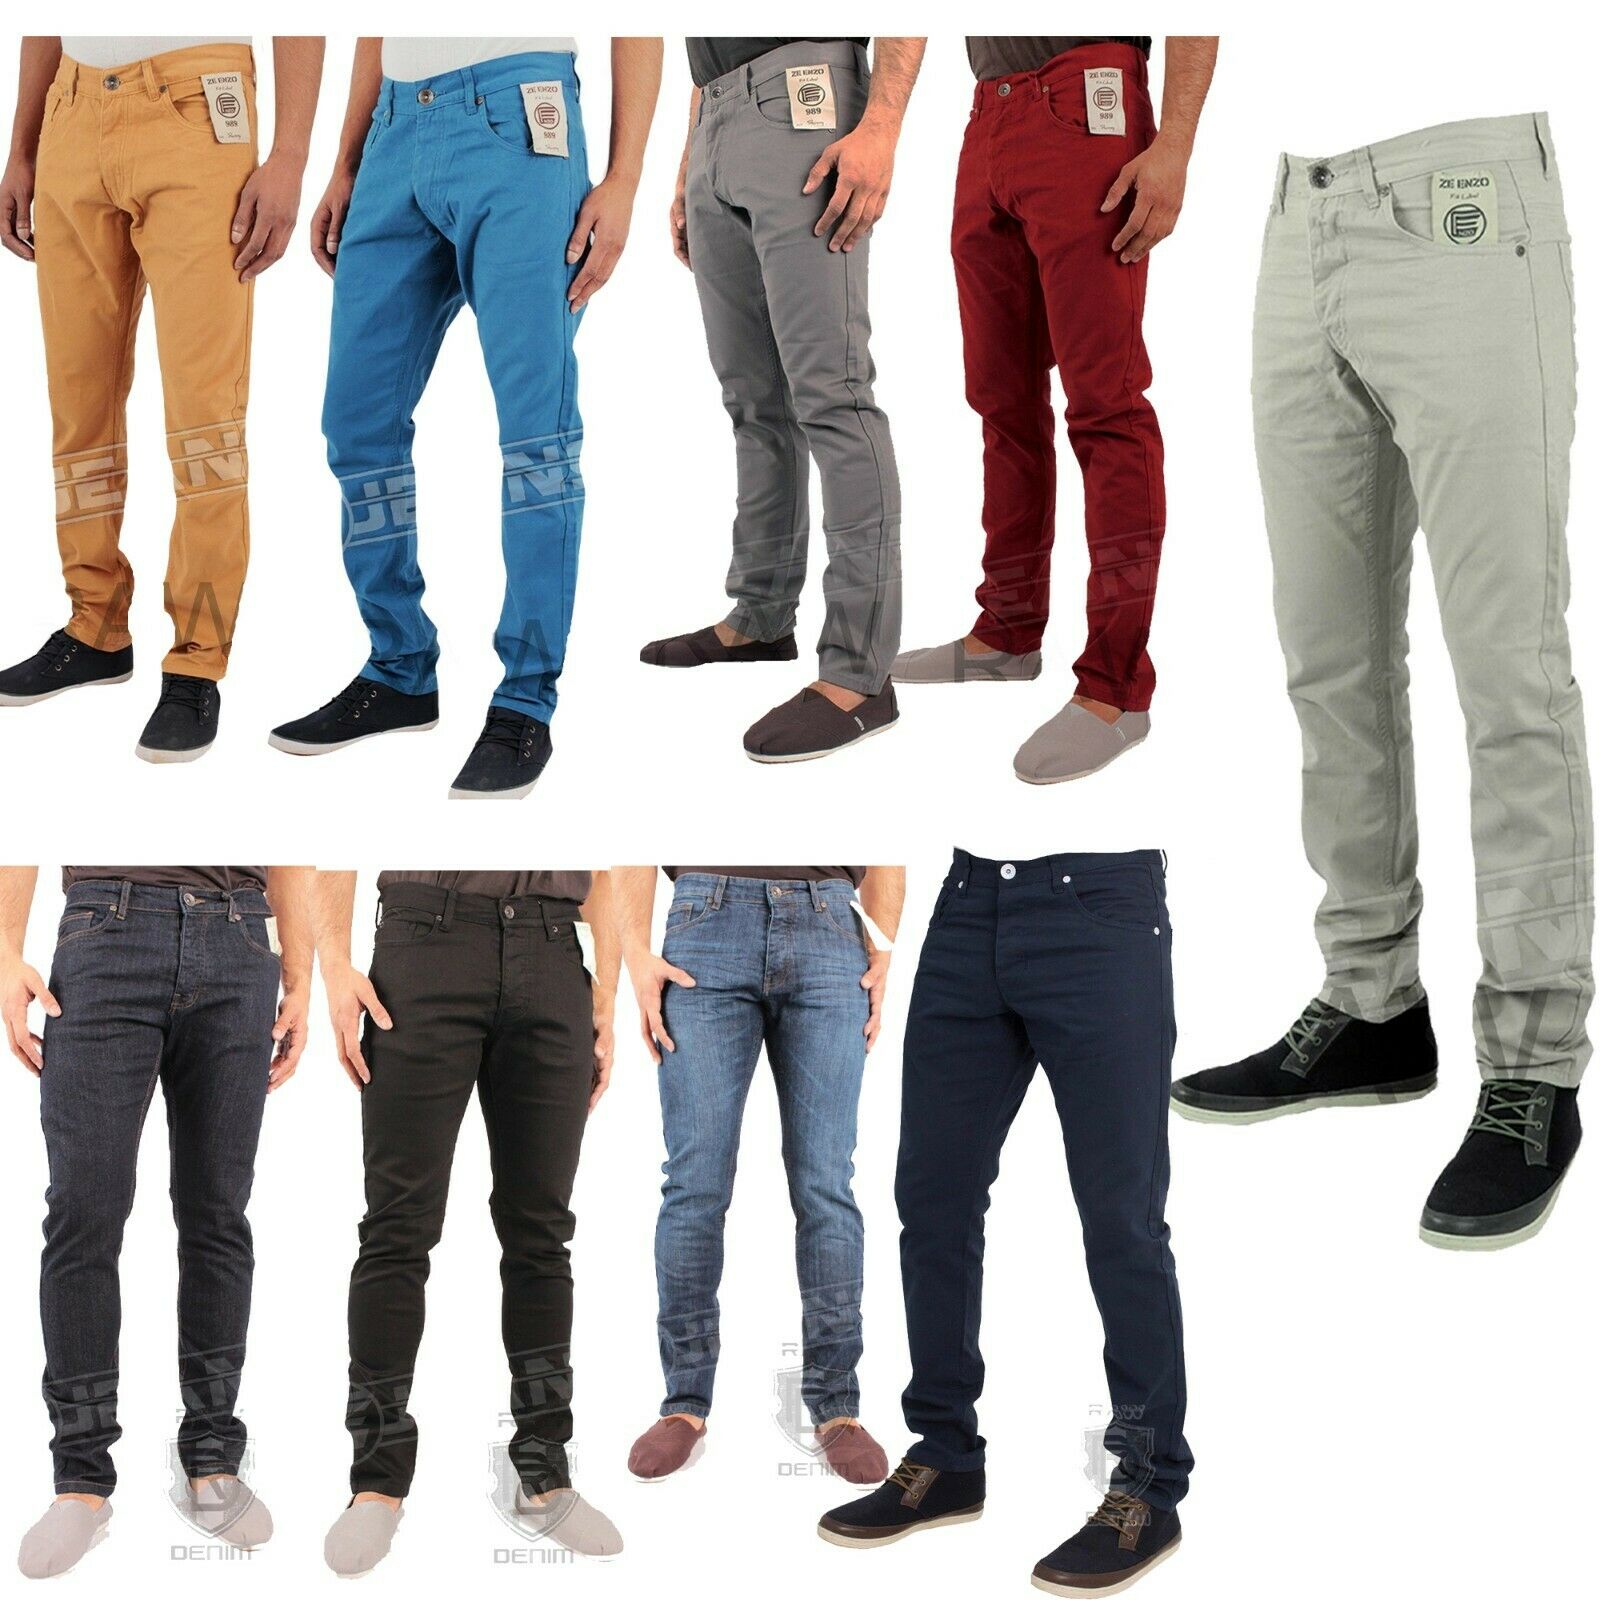 Enzo Mens Chinos Trousers Slim Fit Skinny Stretch Cotton Pants Jeans All Waists